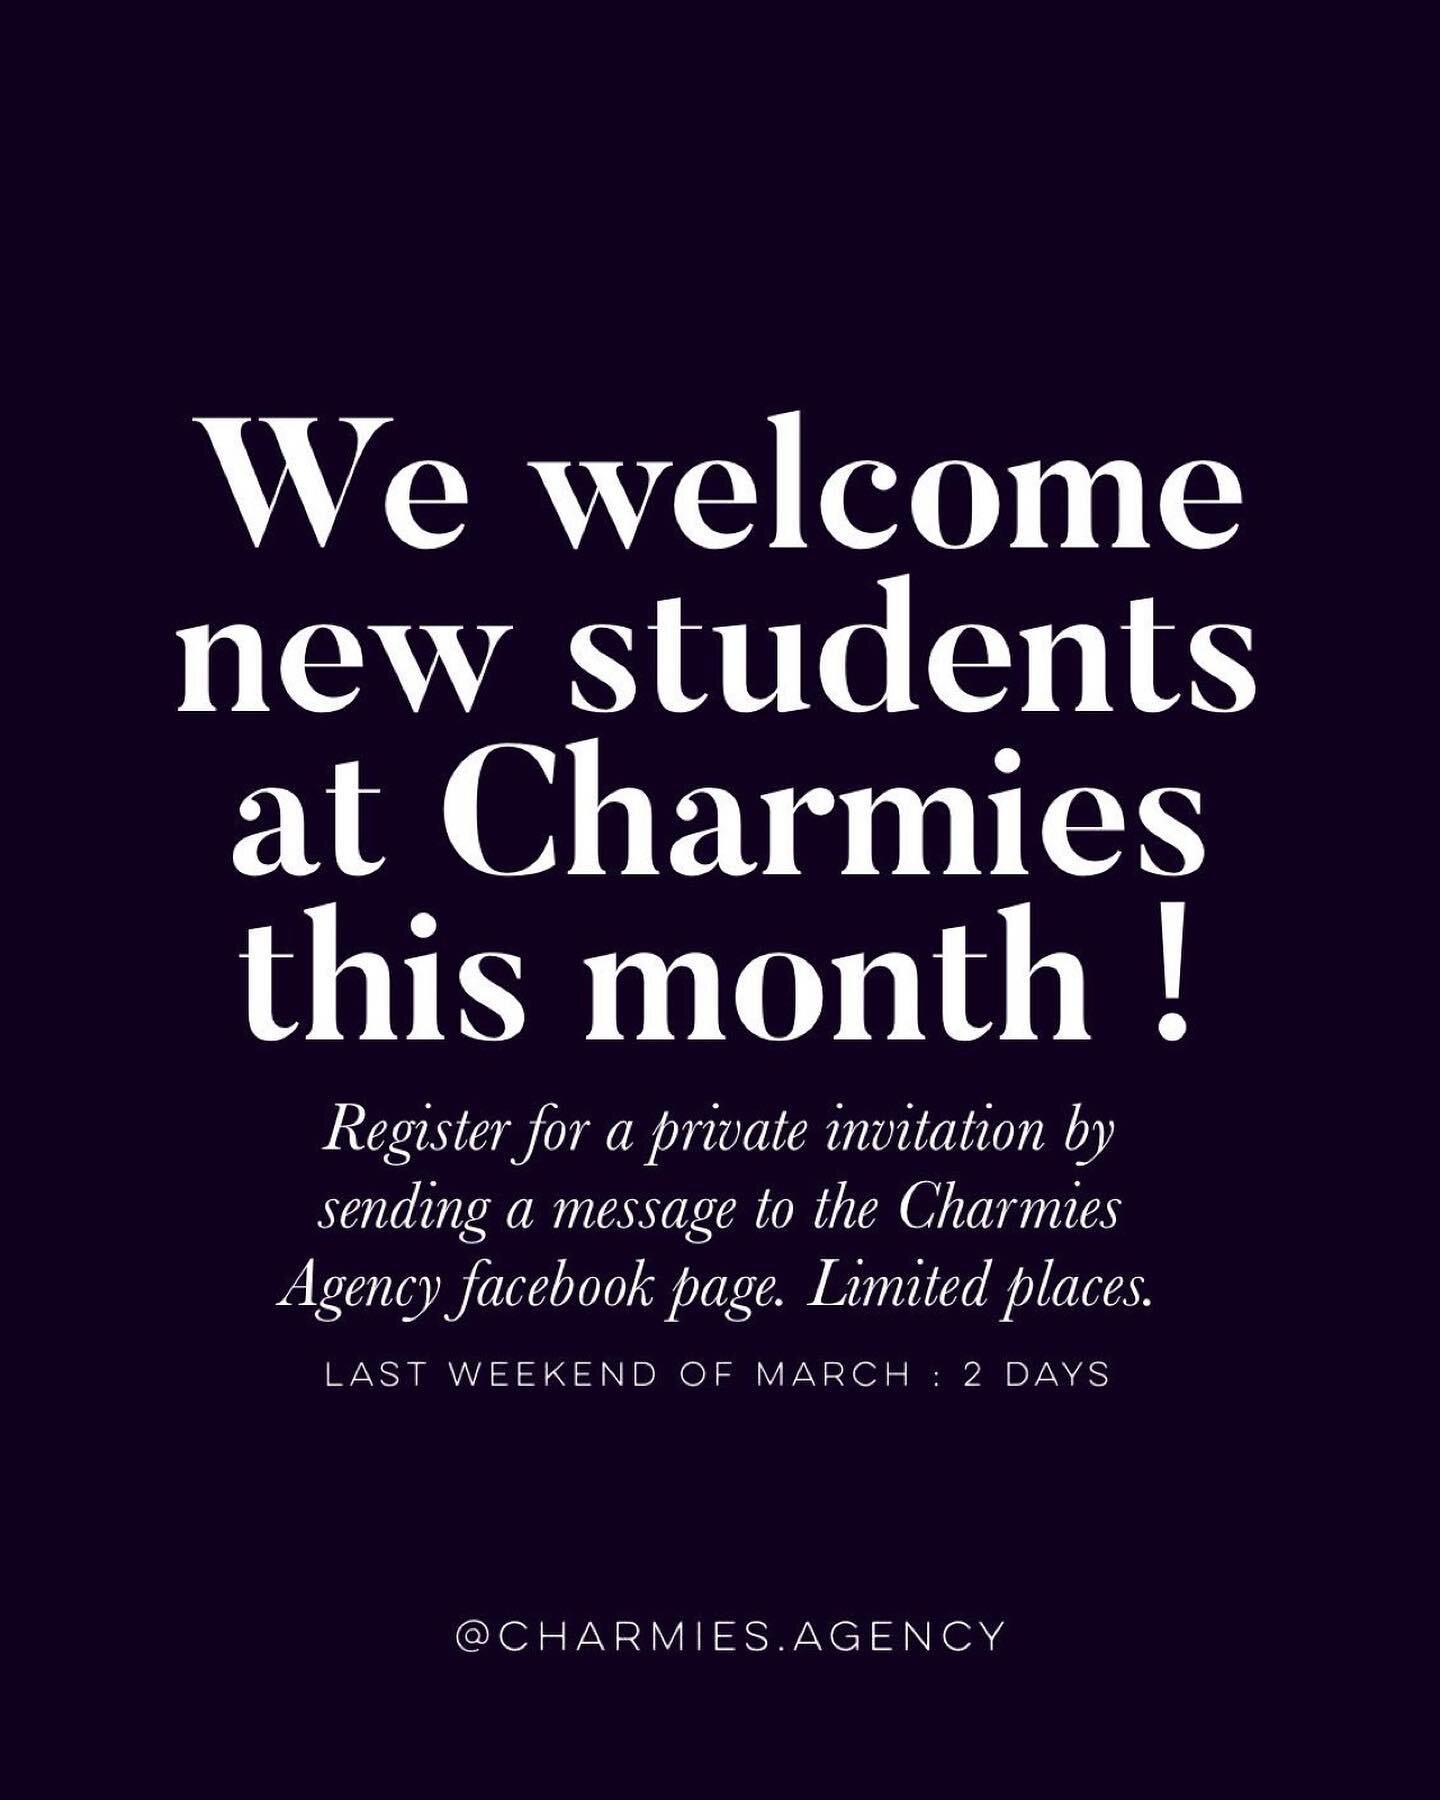 We&rsquo;re so happy to be booked by all of our favorite luxury brands &amp; events ❤️ We receive more requests every single day, which means&hellip; we&rsquo;re welcoming more students to join our team !

Want to join Charmies ?
💌 Send a message to